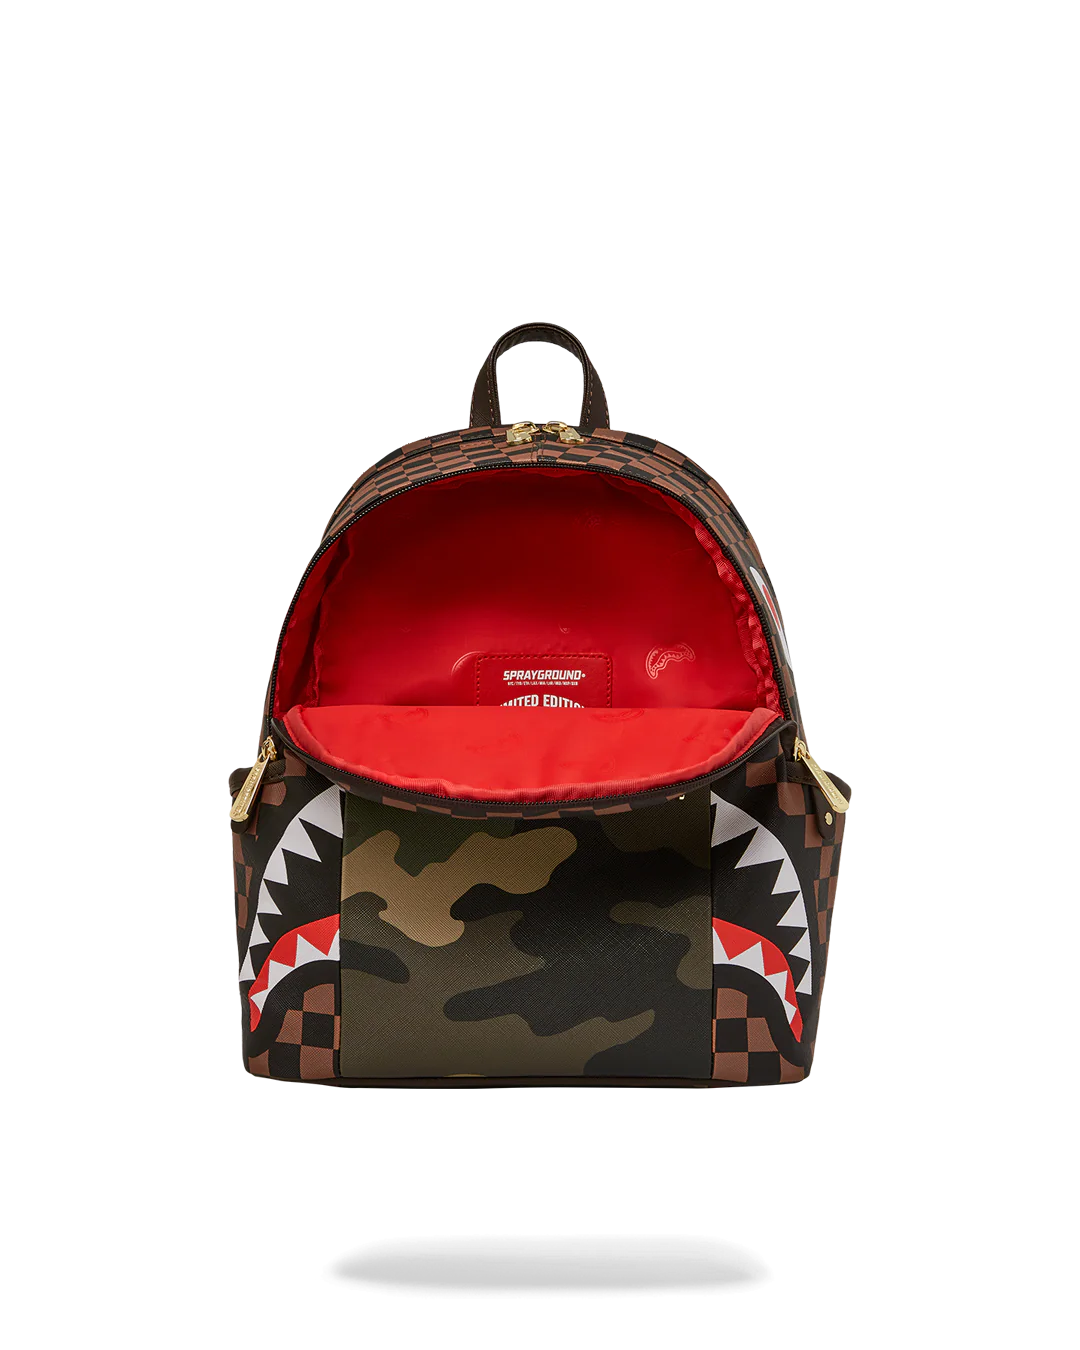 Sprayground new bags collection.. stop by and checkout the new